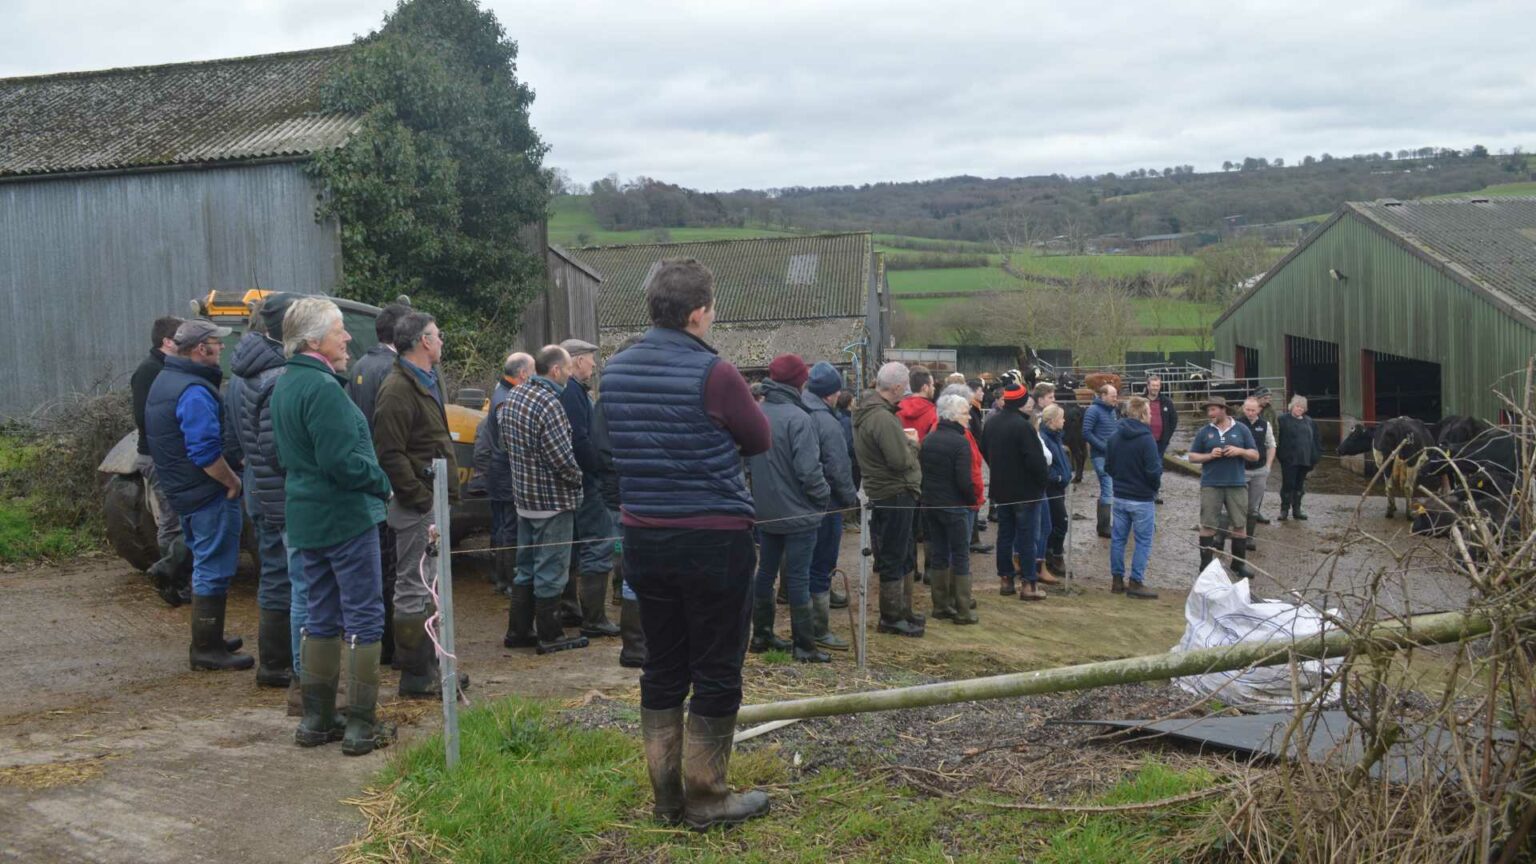 We held our first Farm walk and discussion of 2022 on Tuesday 8th February at North Waterhayne Farm as guests of Jim and Lorna Burdge.